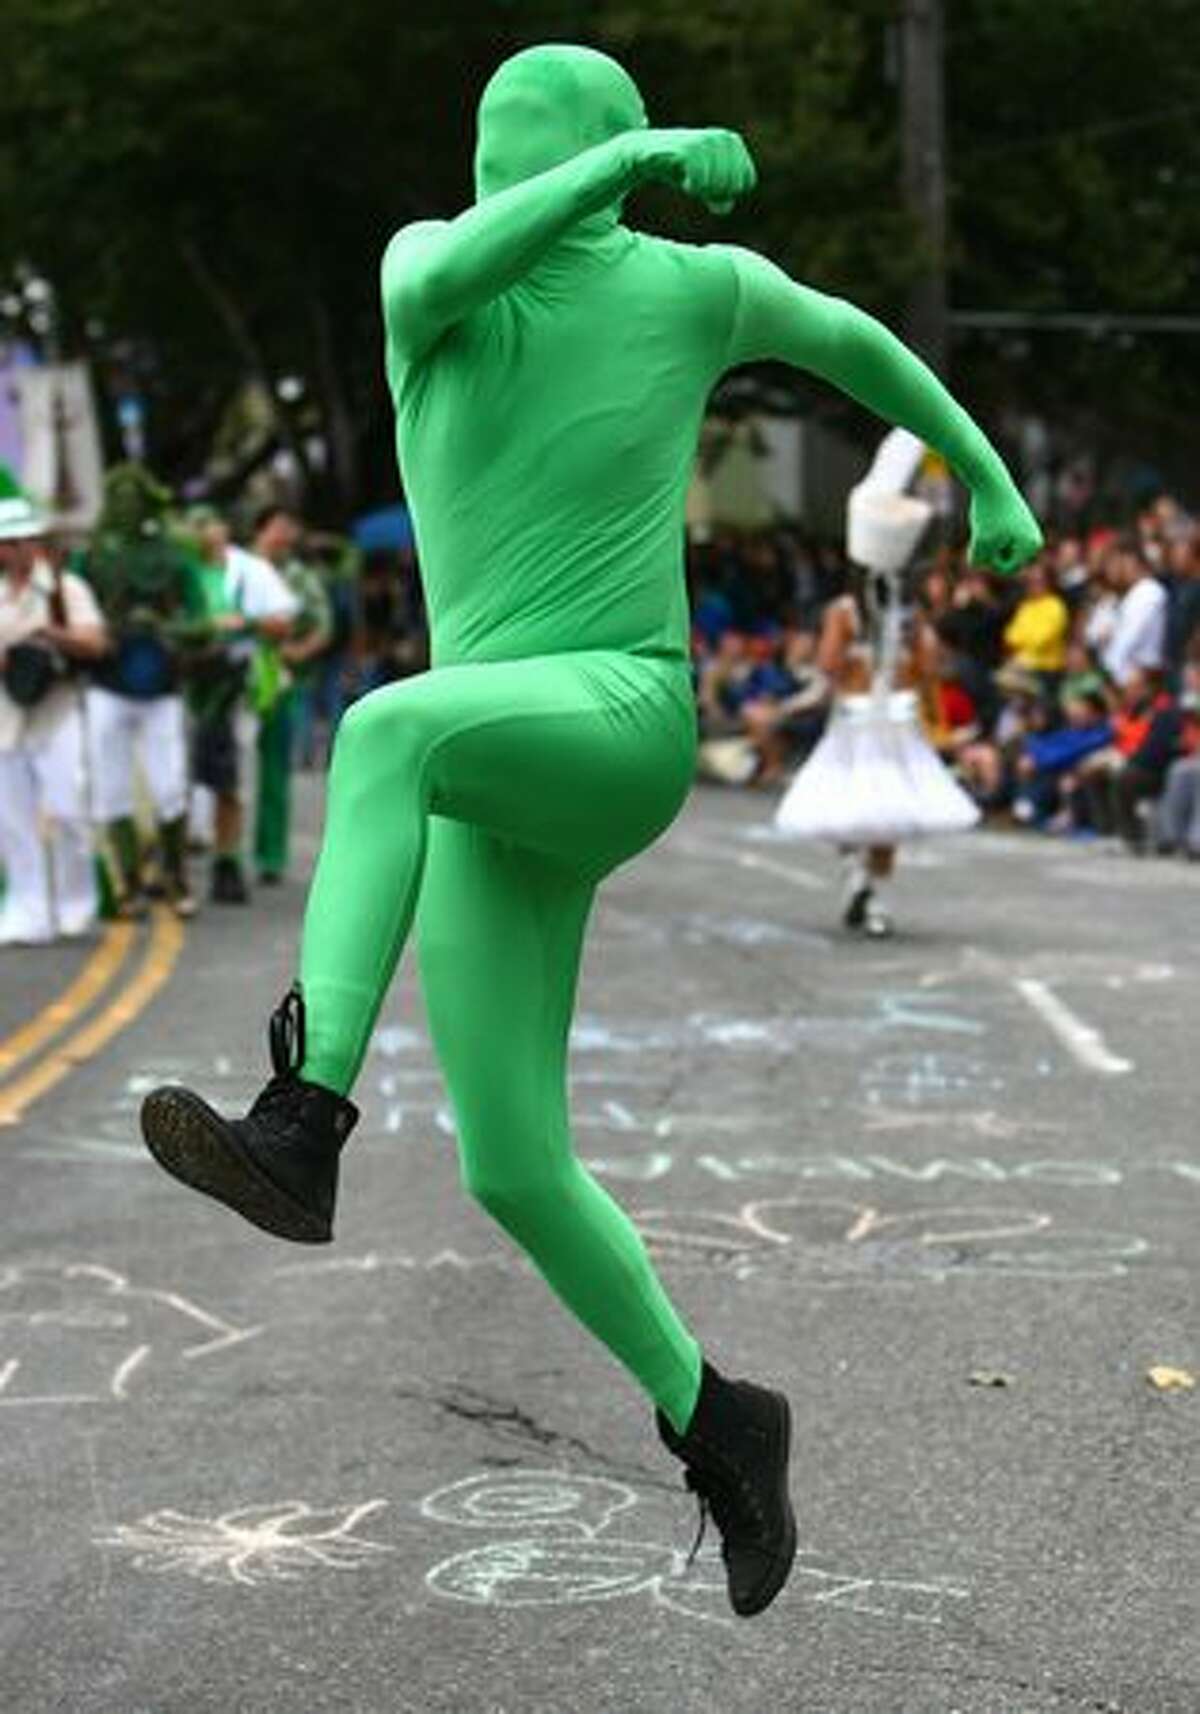 A green man runs across North 36th Street during the Fremont Solstice Parade on Saturday June 19, 2010 in Seattle.